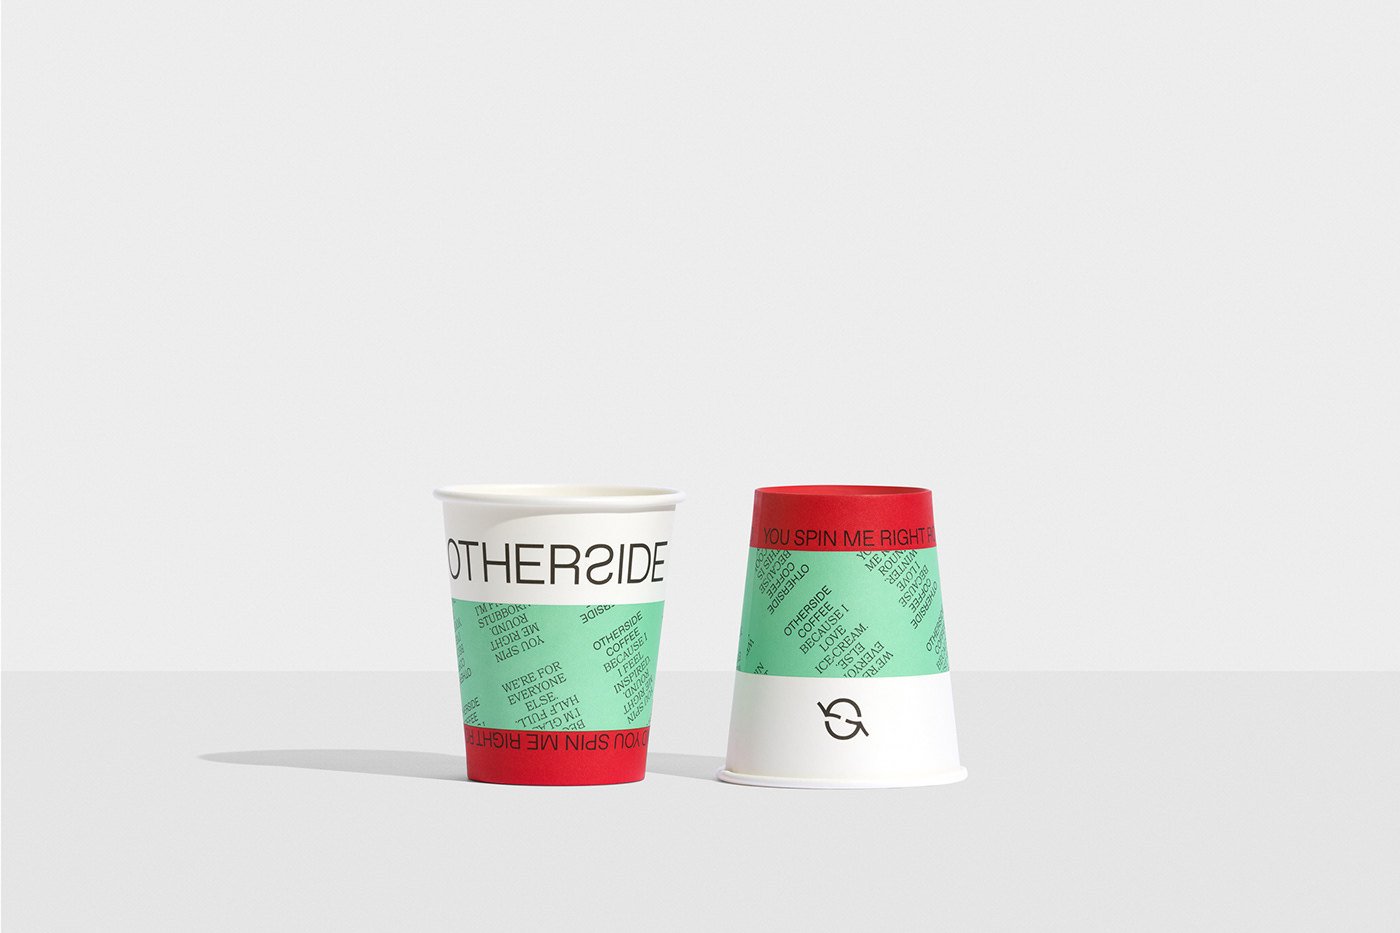 OTHERSIDE packaging designed by Pop & Pac Studio